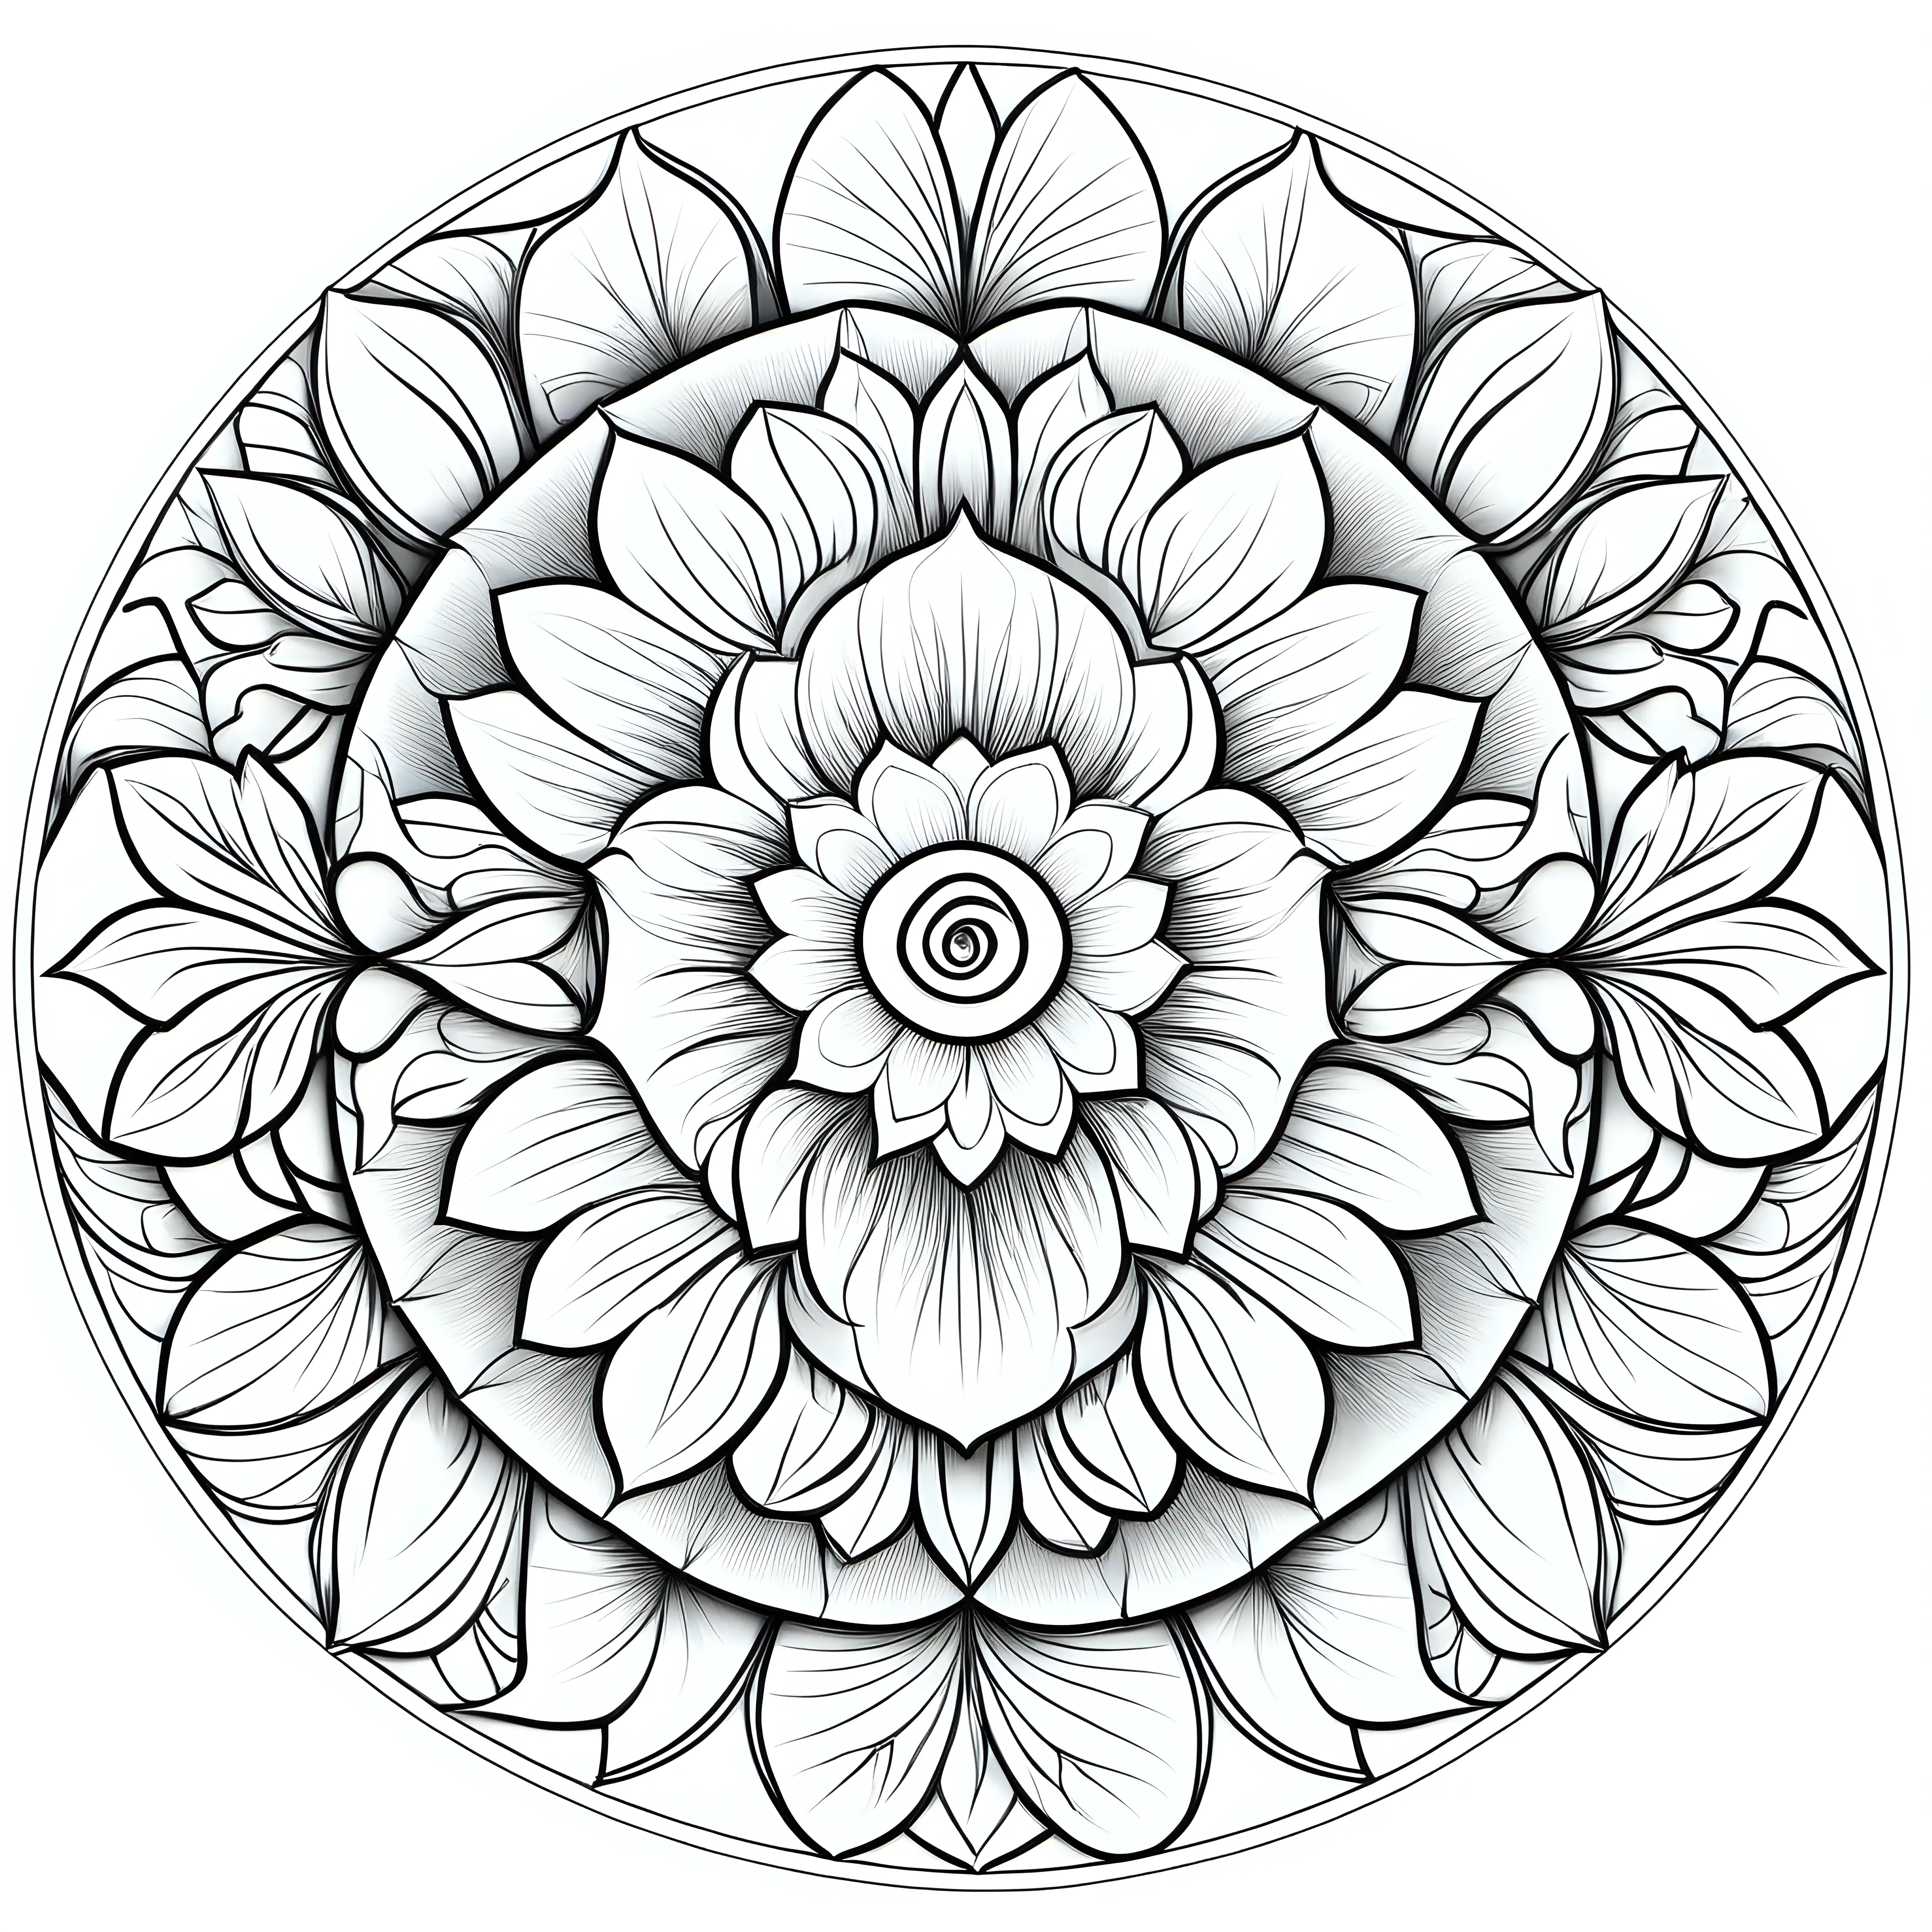 Floral Mandala Coloring Page Intricate Symmetry for Relaxing Creativity